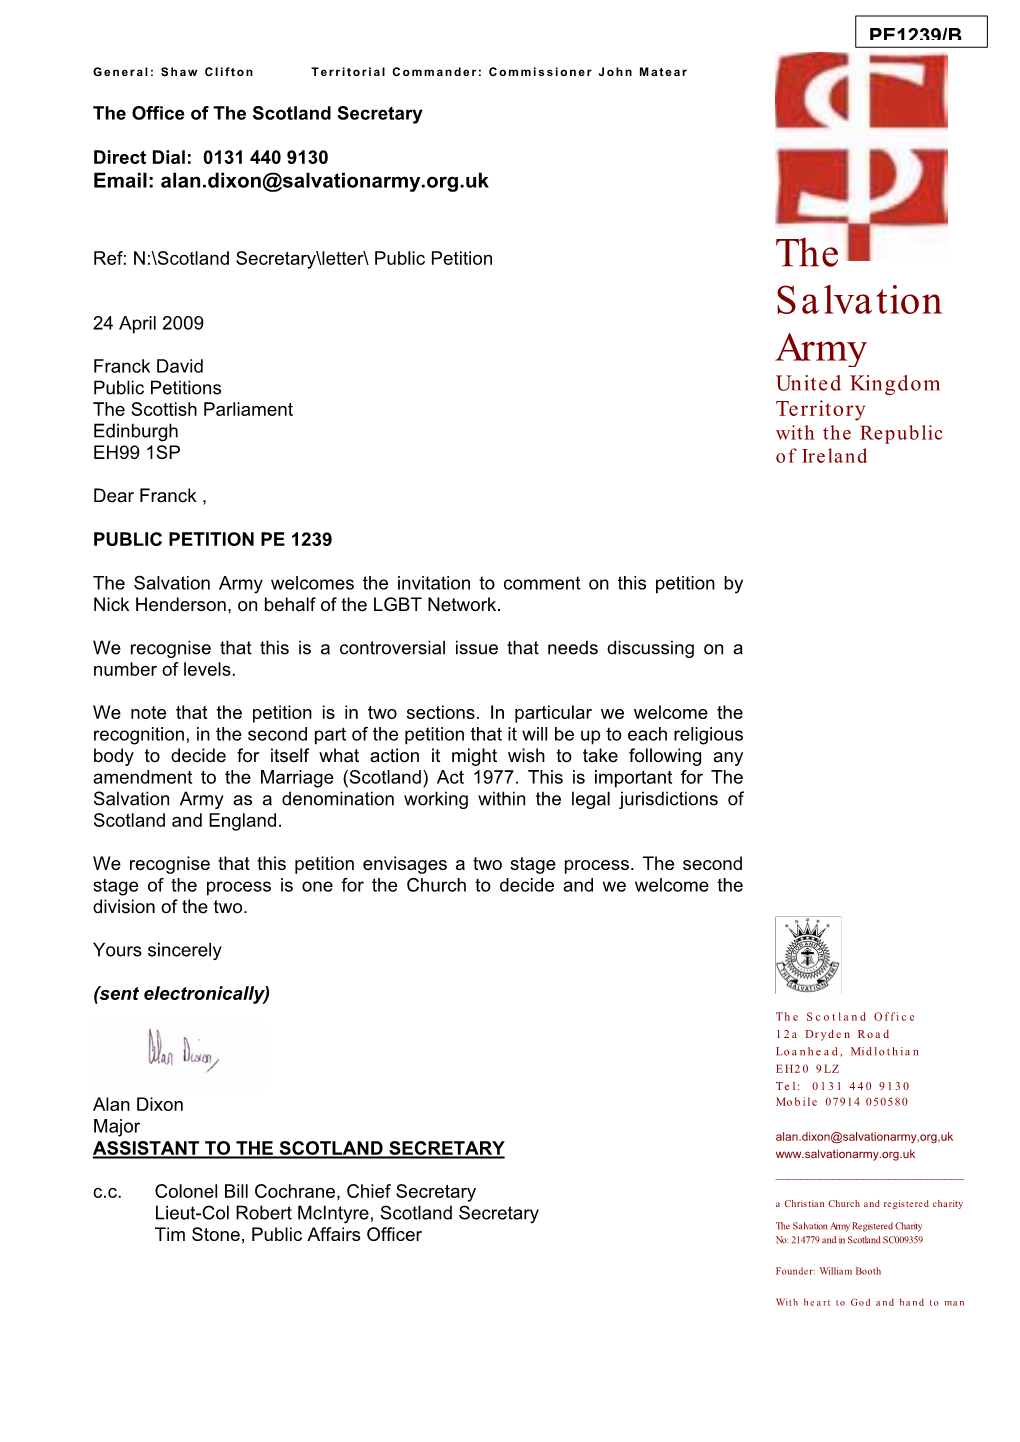 The Salvation Army Welcomes the Invitation to Comment on This Petition by Nick Henderson, on Behalf of the LGBT Network